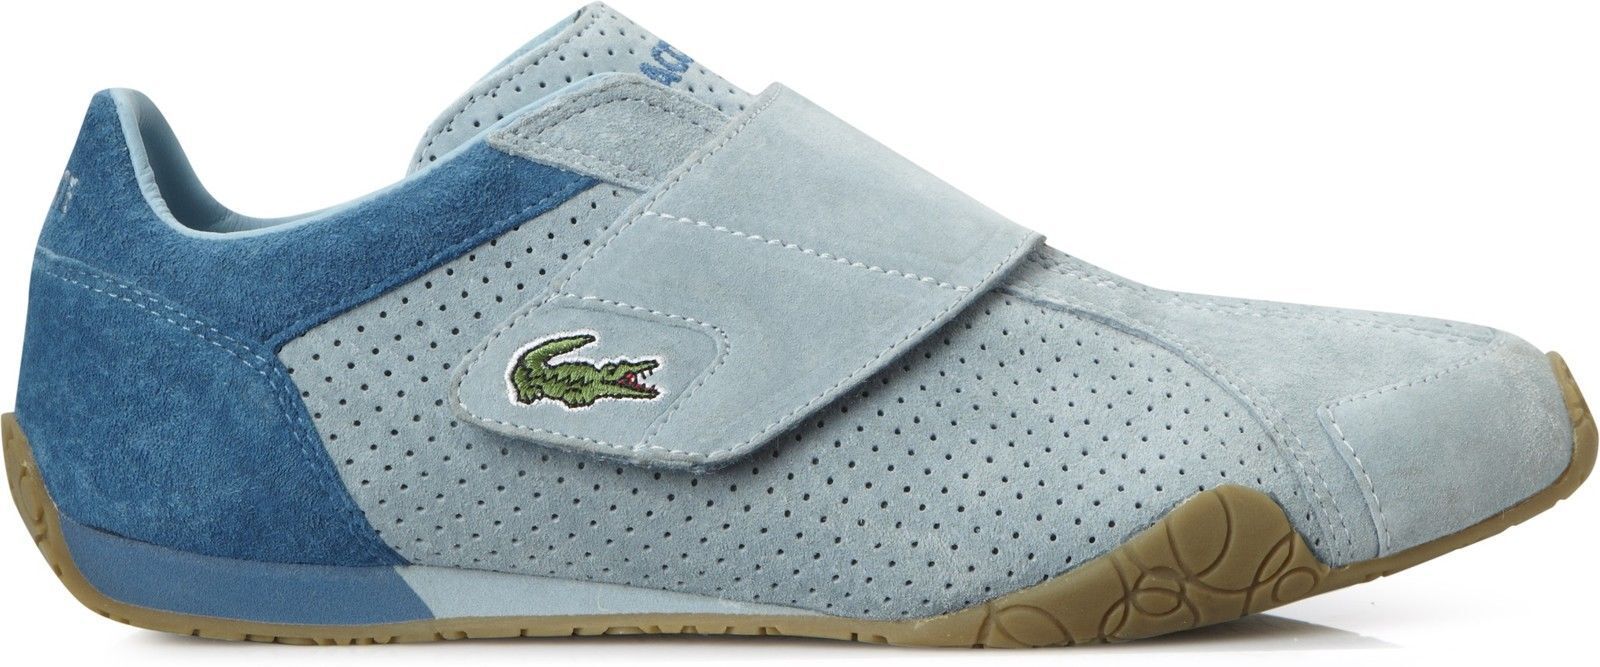 lacoste india shoes